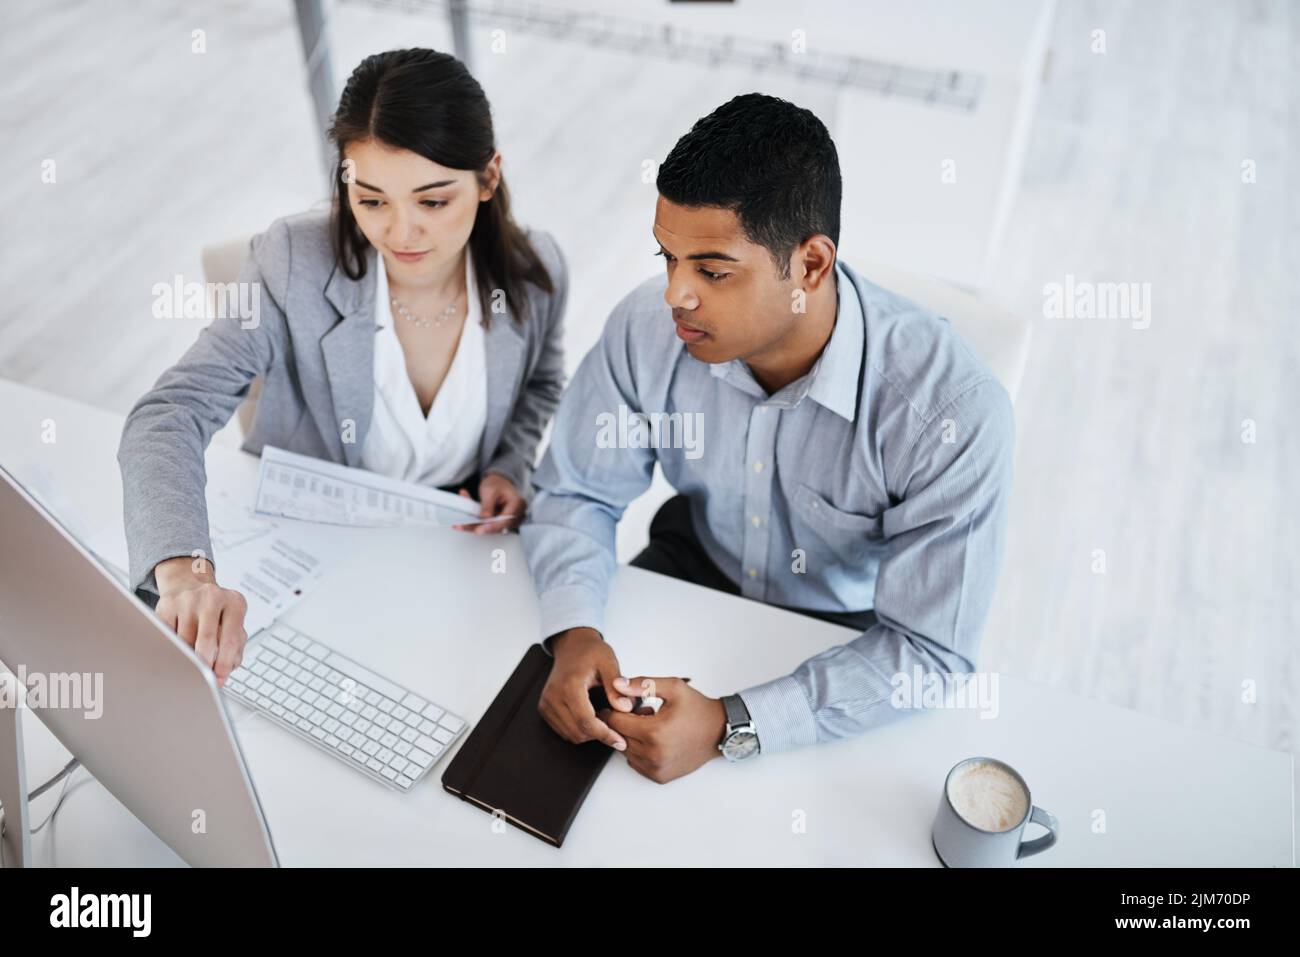 A collaborative work culture keeps quality up. a young businessman and businesswoman using a computer in a modern office. Stock Photo